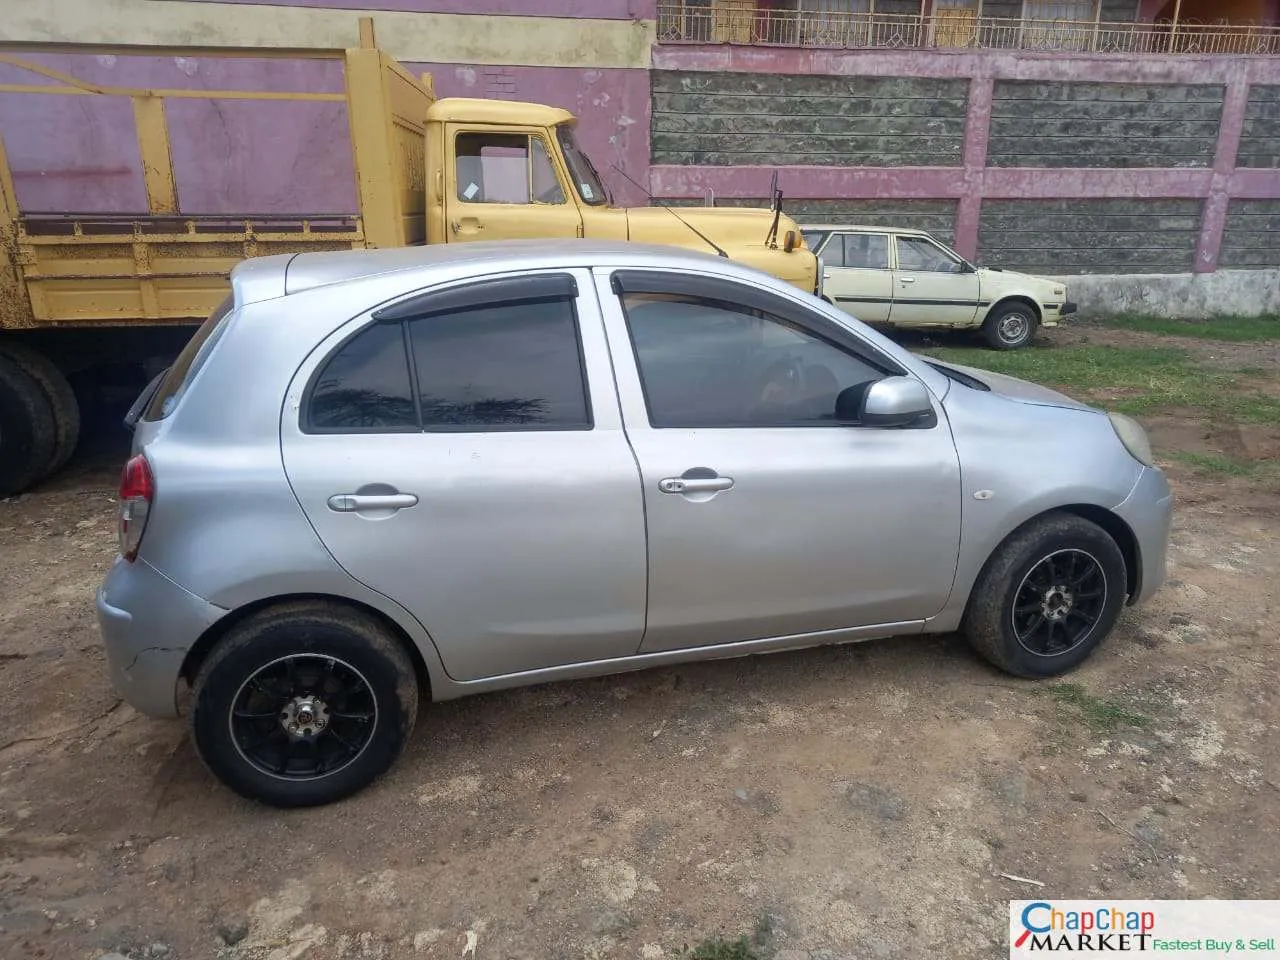 Cars Cars For Sale-Nissan March kenya 300K ONLY CHEAPEST You ONLY Pay 30% Deposit Nissan March for sale in kenya Trade in Ok Wow! Hire purchase installments 6